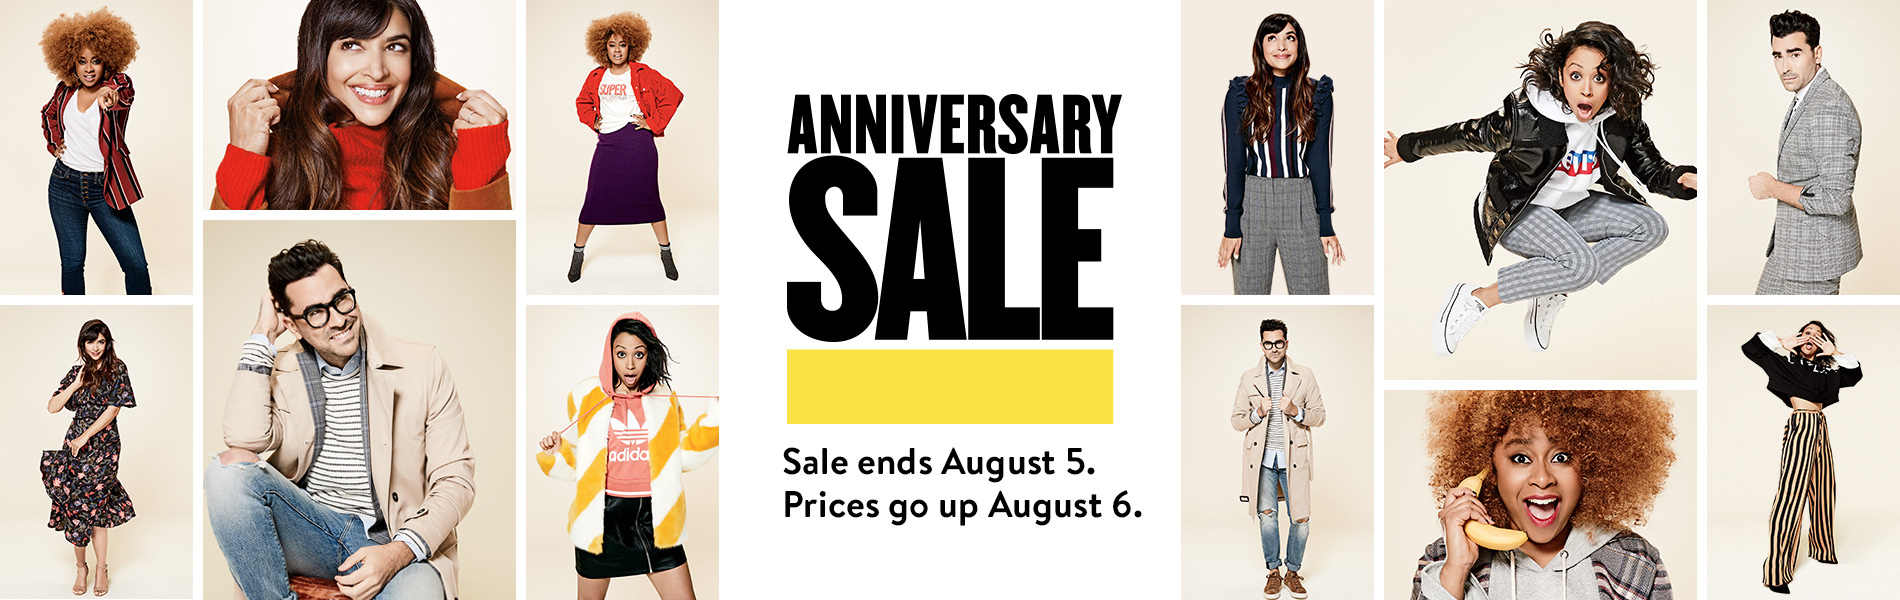 The One-of-a-Kind Nordstrom Anniversary Sale Starts This Friday